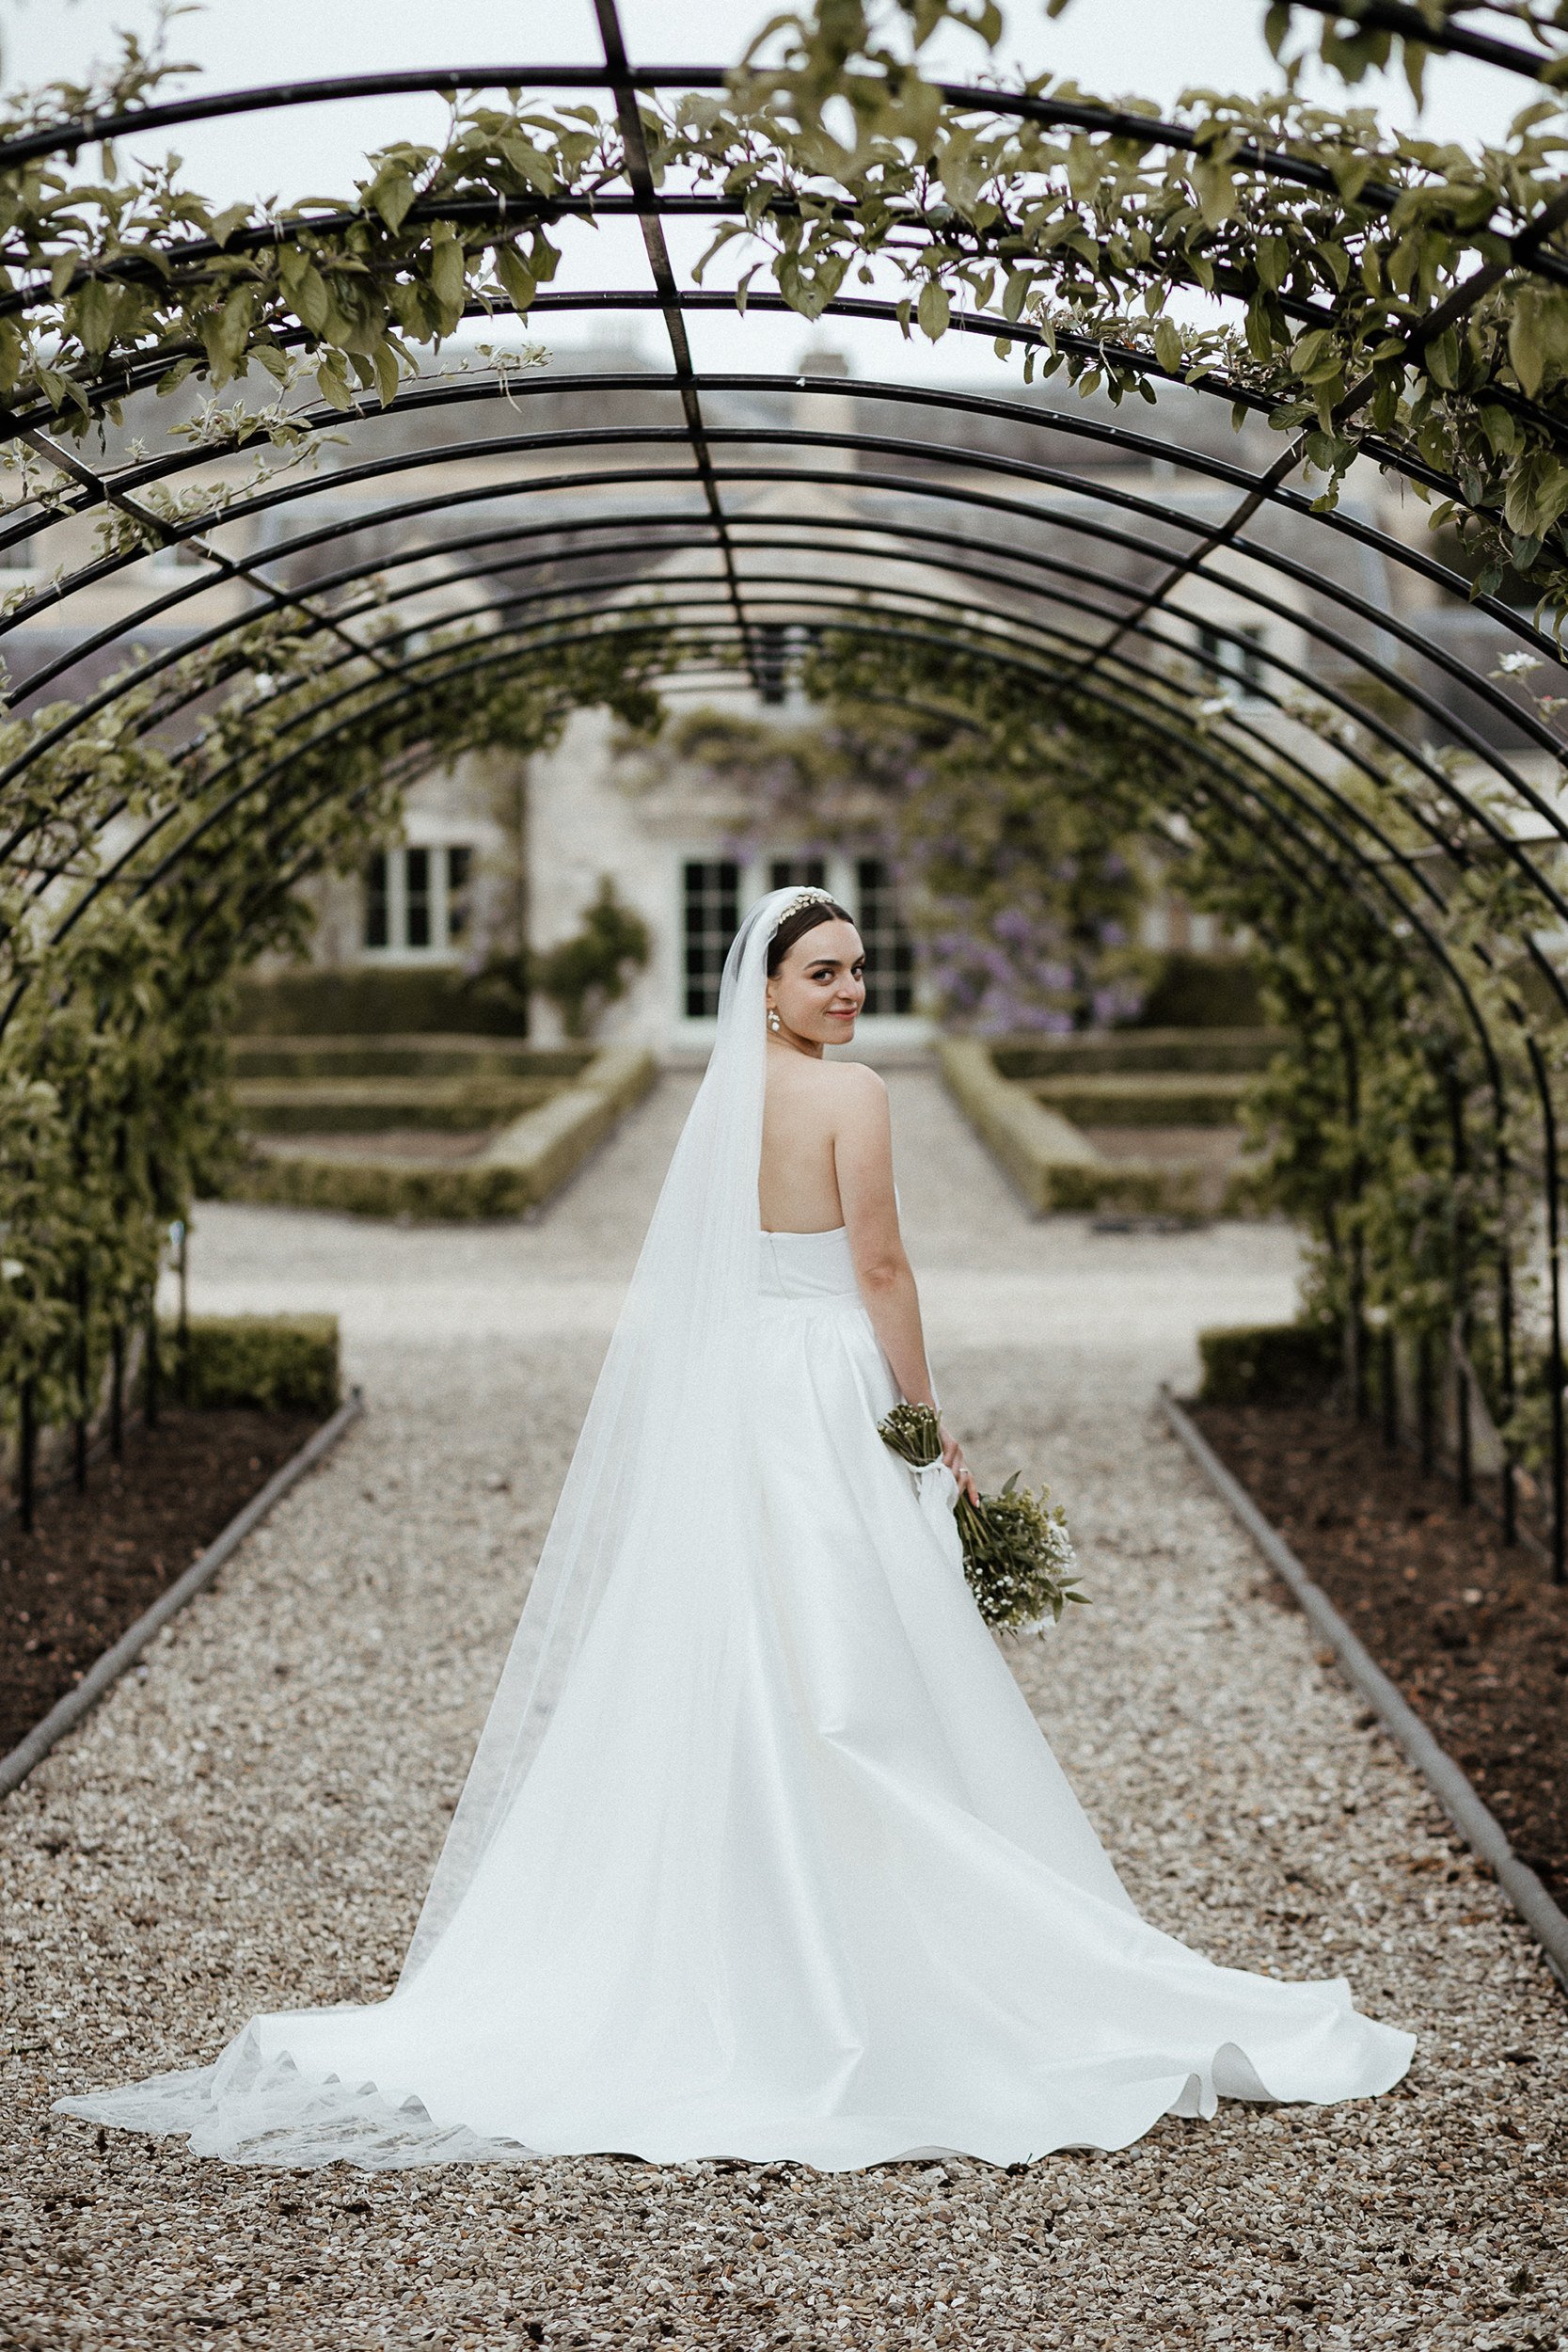 Beautiful bride India wore a wedding dress by Halfpenny London